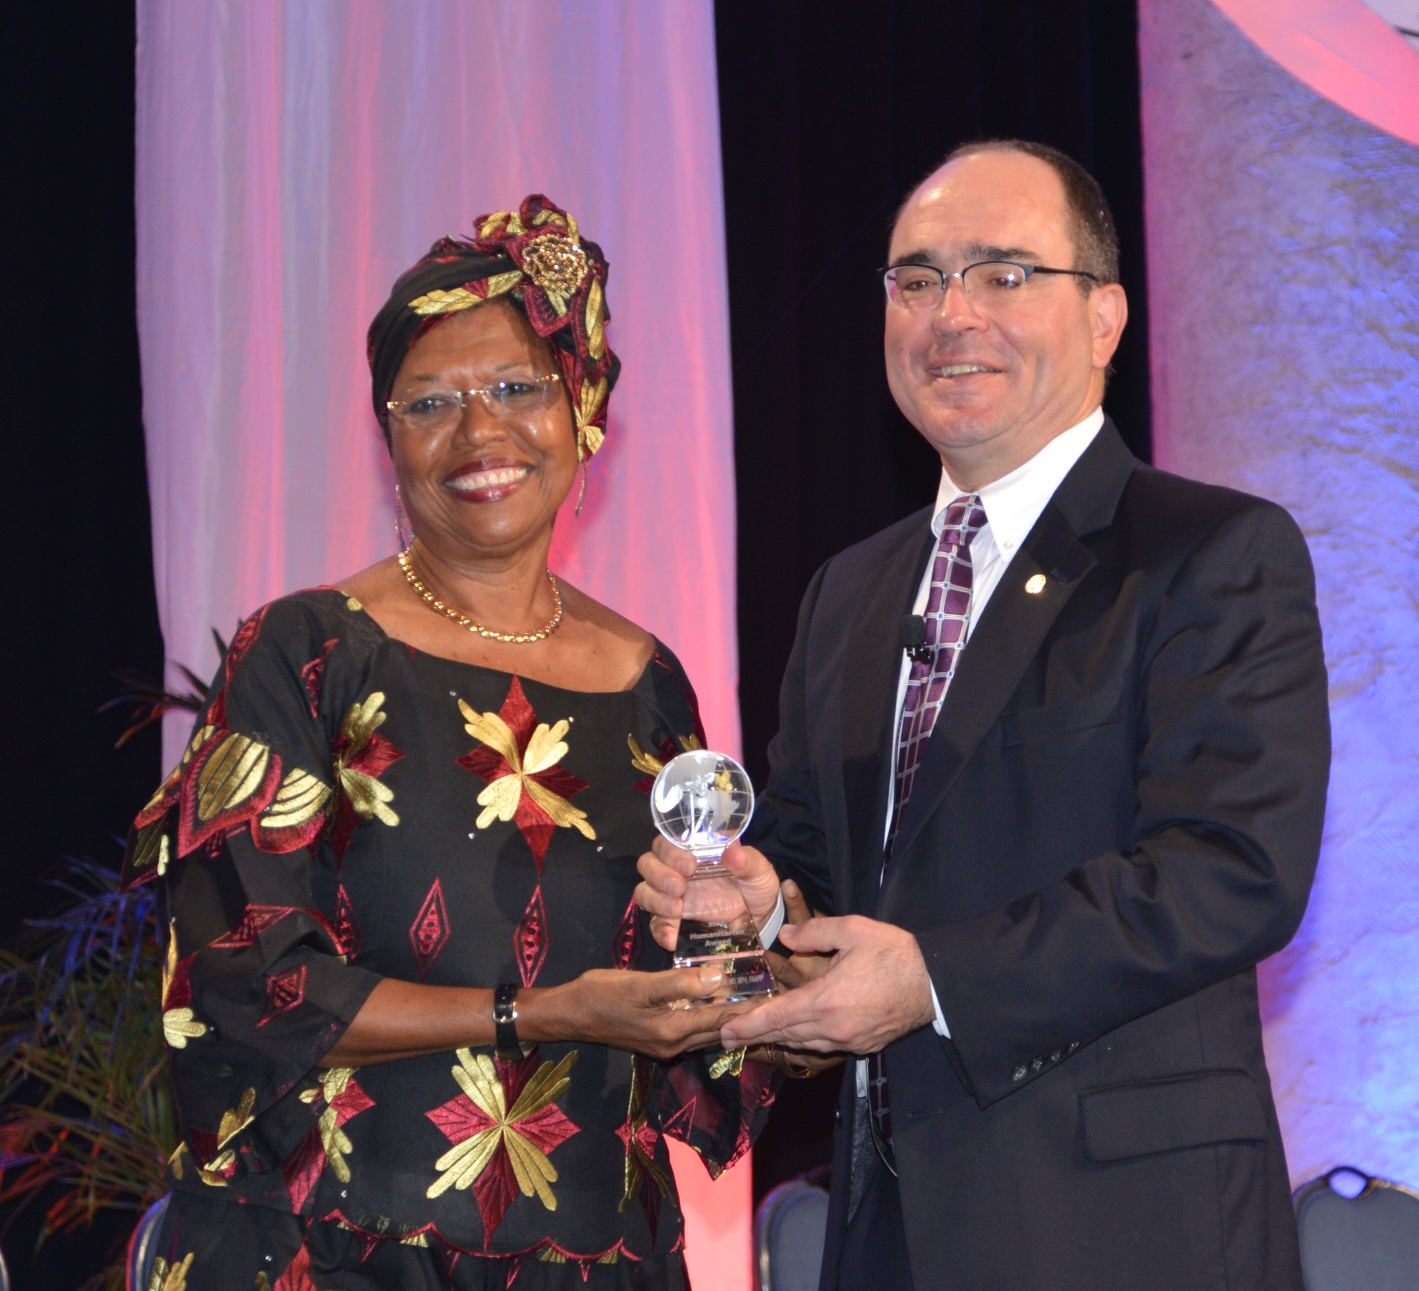 Dr. Cora L.E Christian receiving the 2013 American Academy of Family Physicians (AAFP) Humanitarian Award from the president of AAFP at its Congress of Delegates.